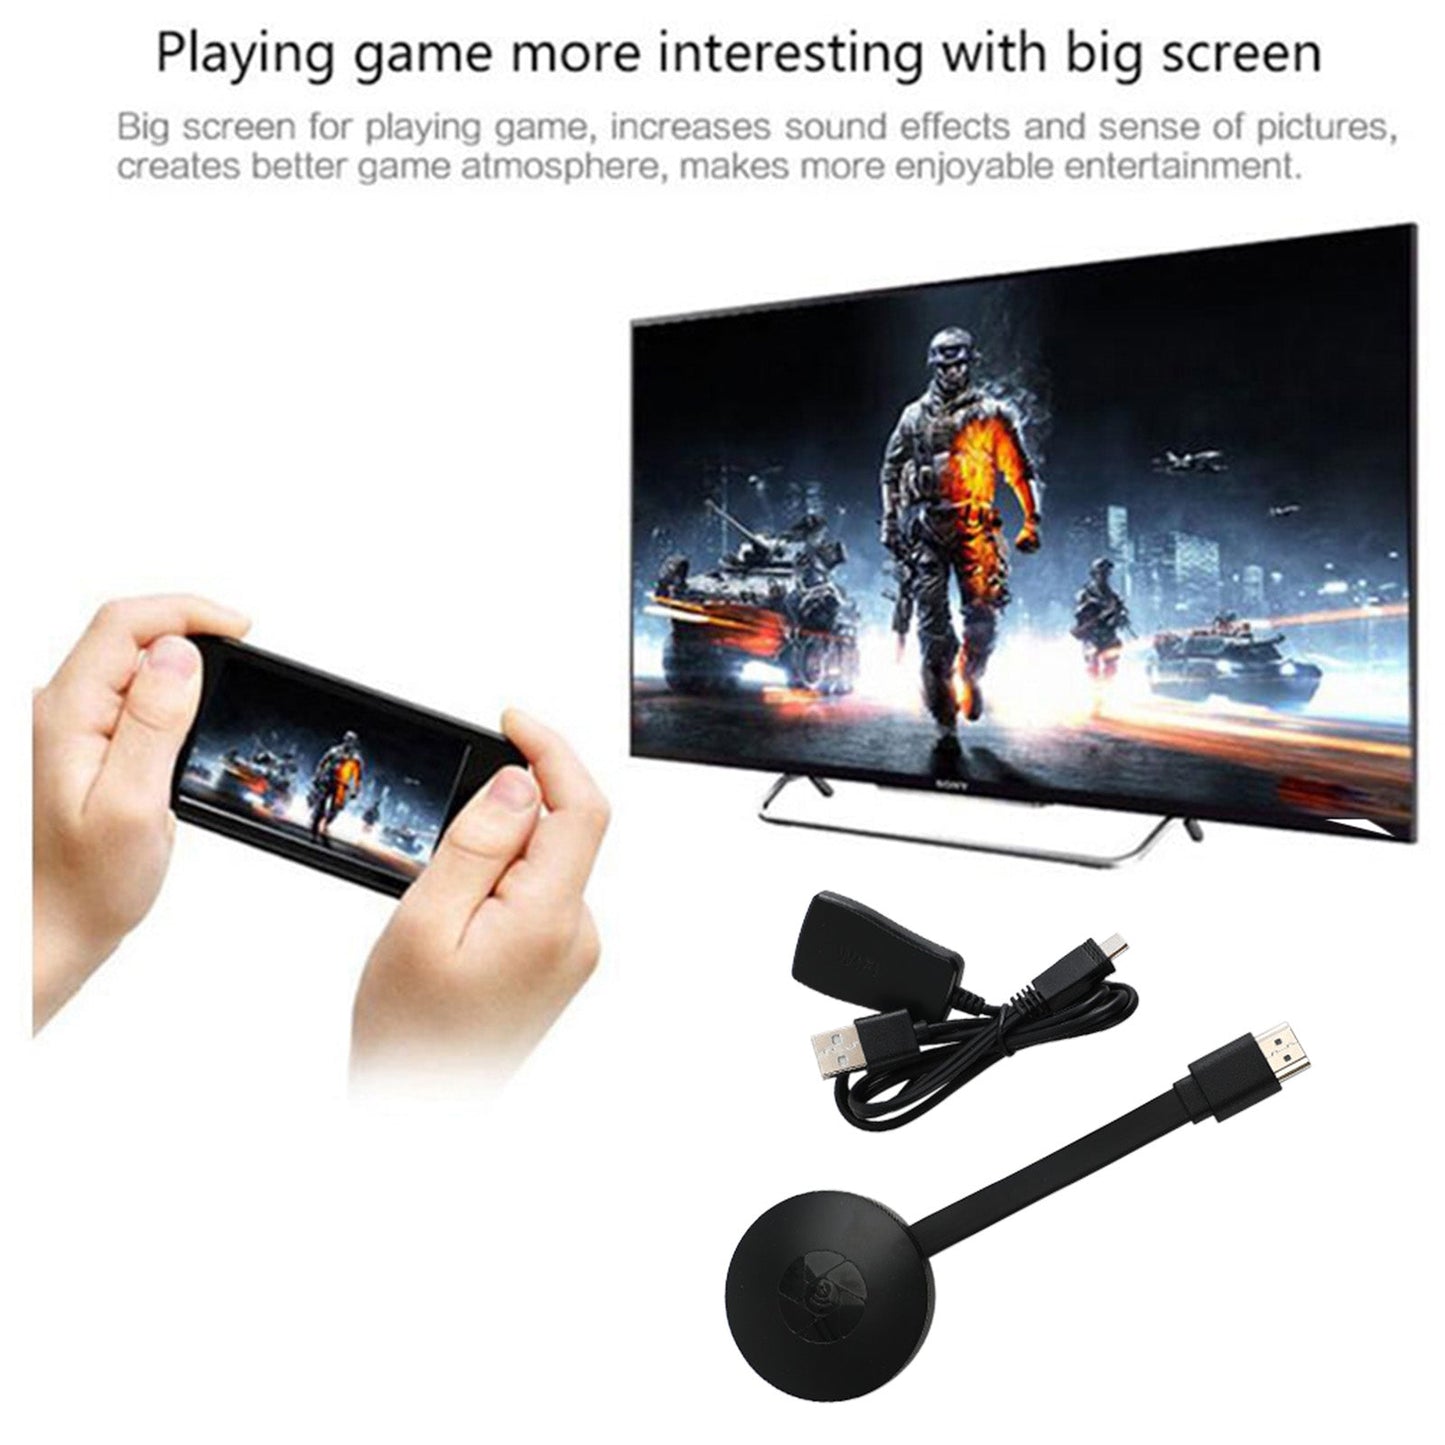 4K 1080P Wireless WiFi Display Dongle TV Stick HDMI G2 Adapter For IOS Android